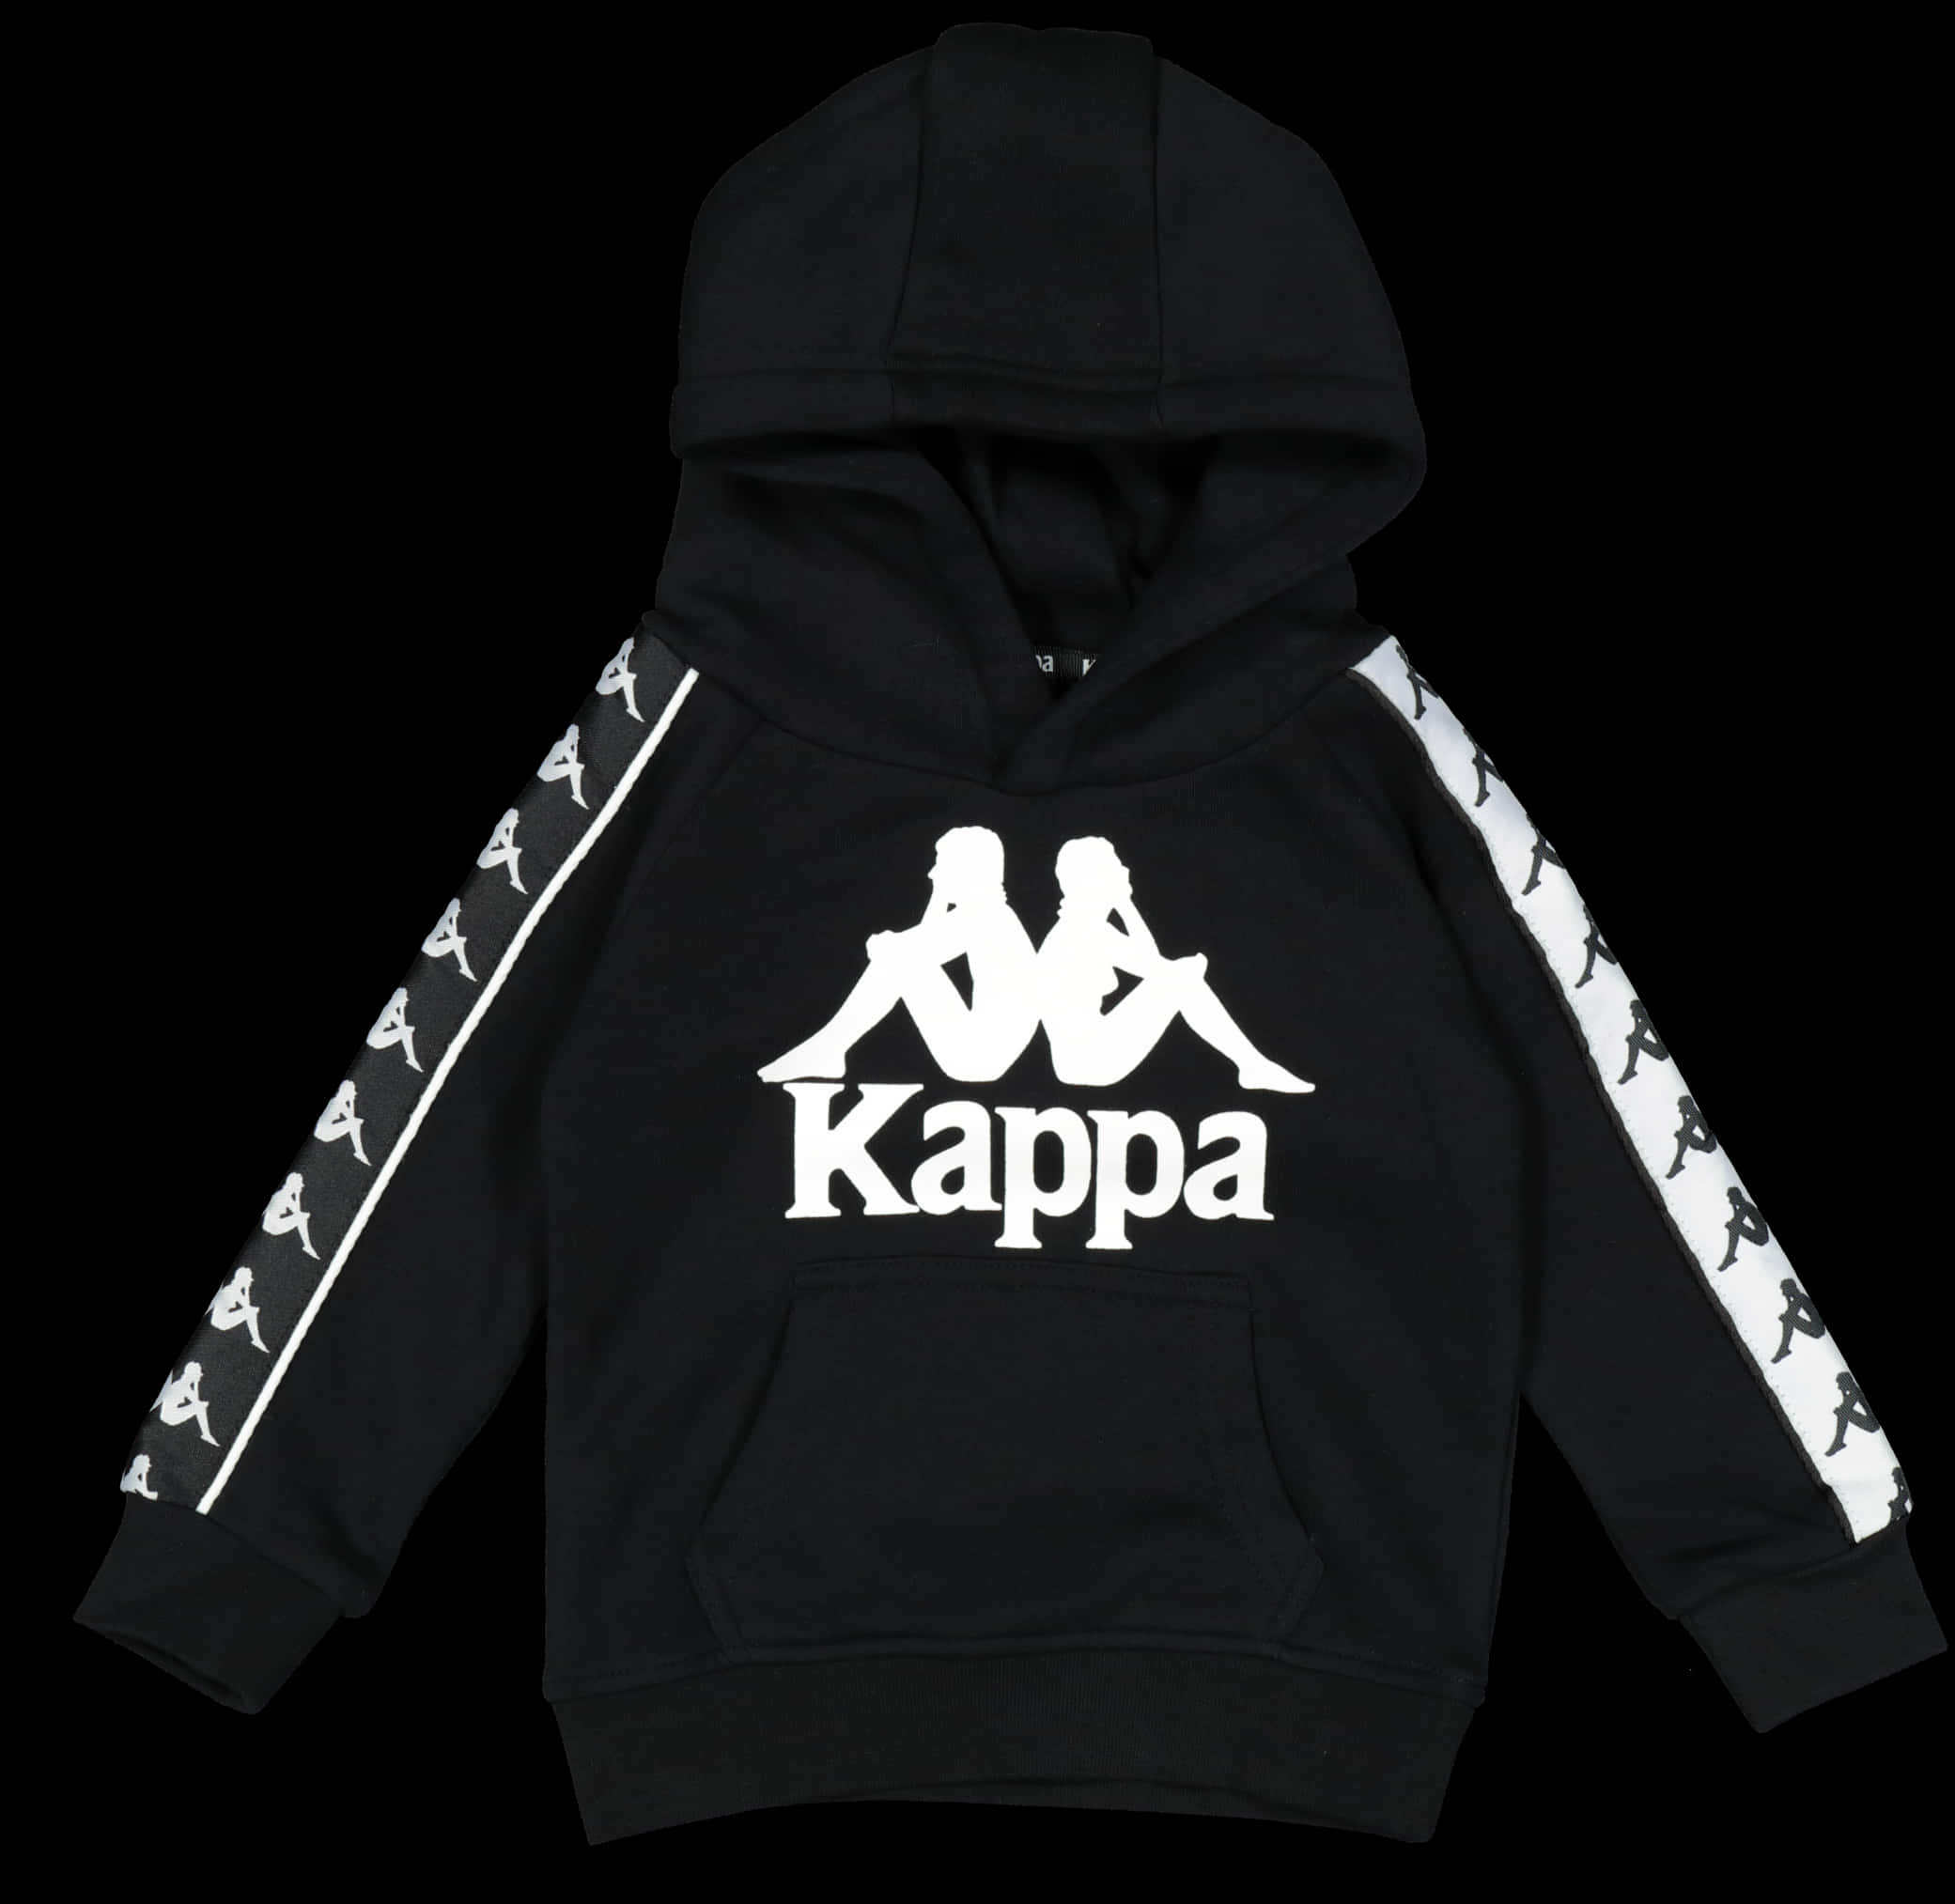 A Black Hoodie With White Letters On It